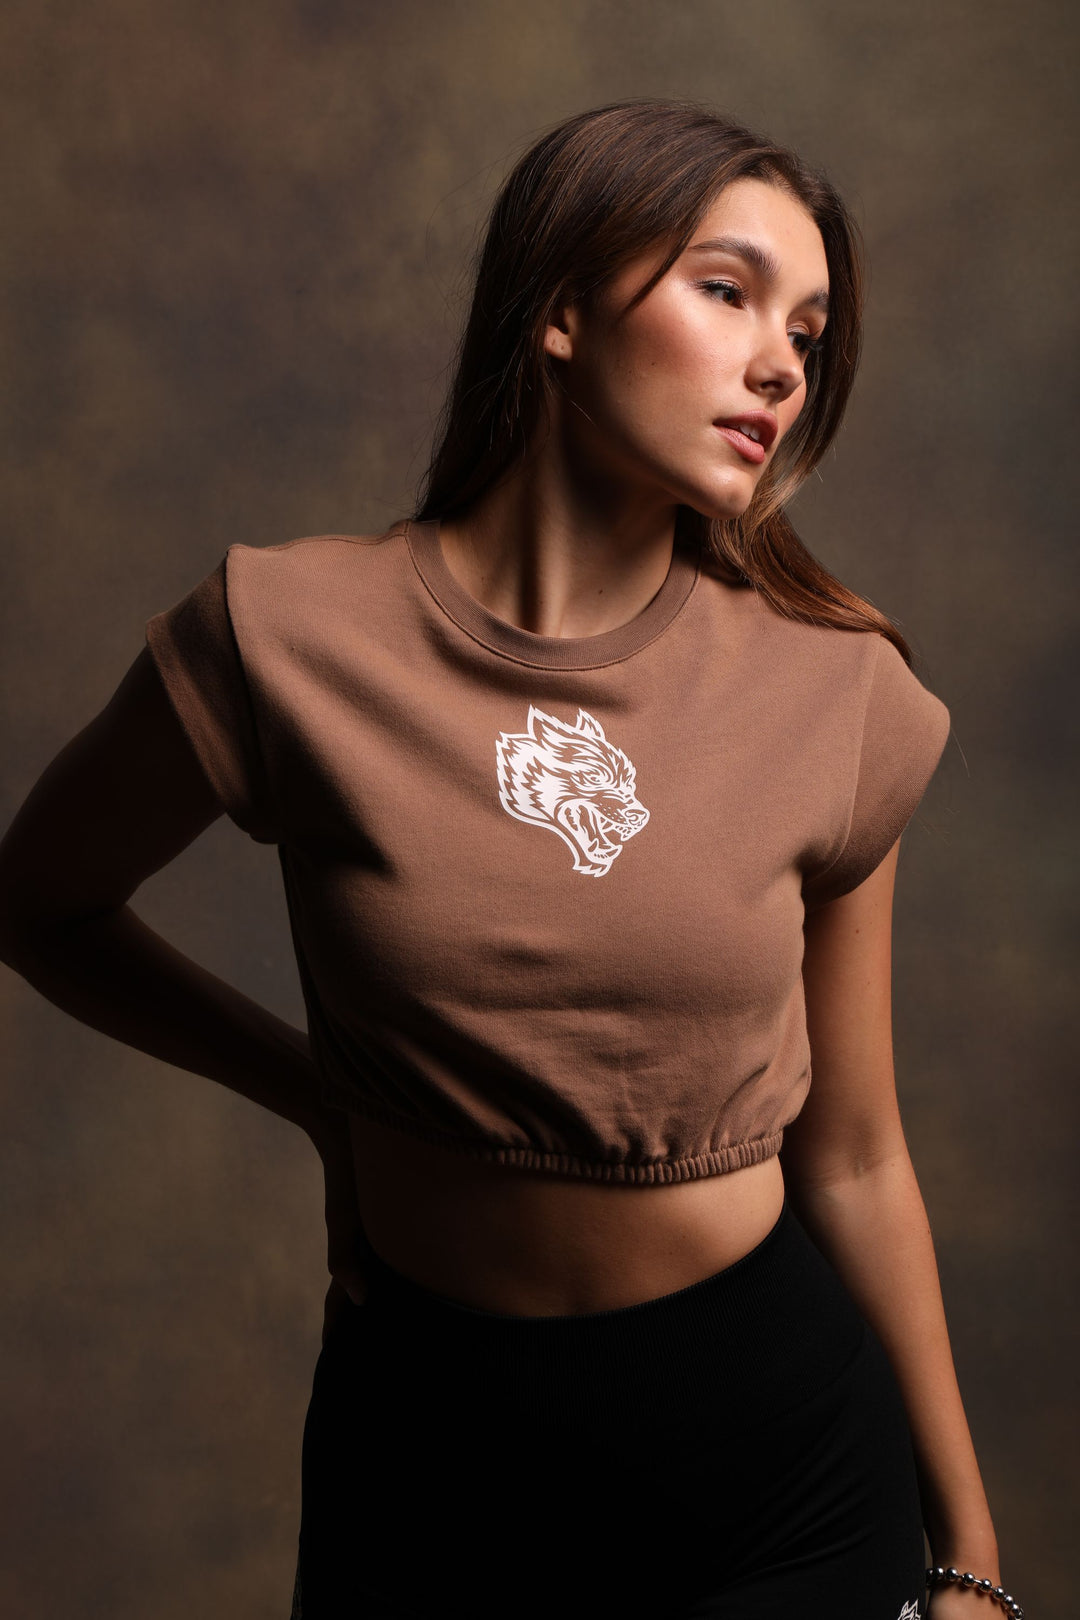 Living "Wellness" (Cropped) Tee in Mojave Brown